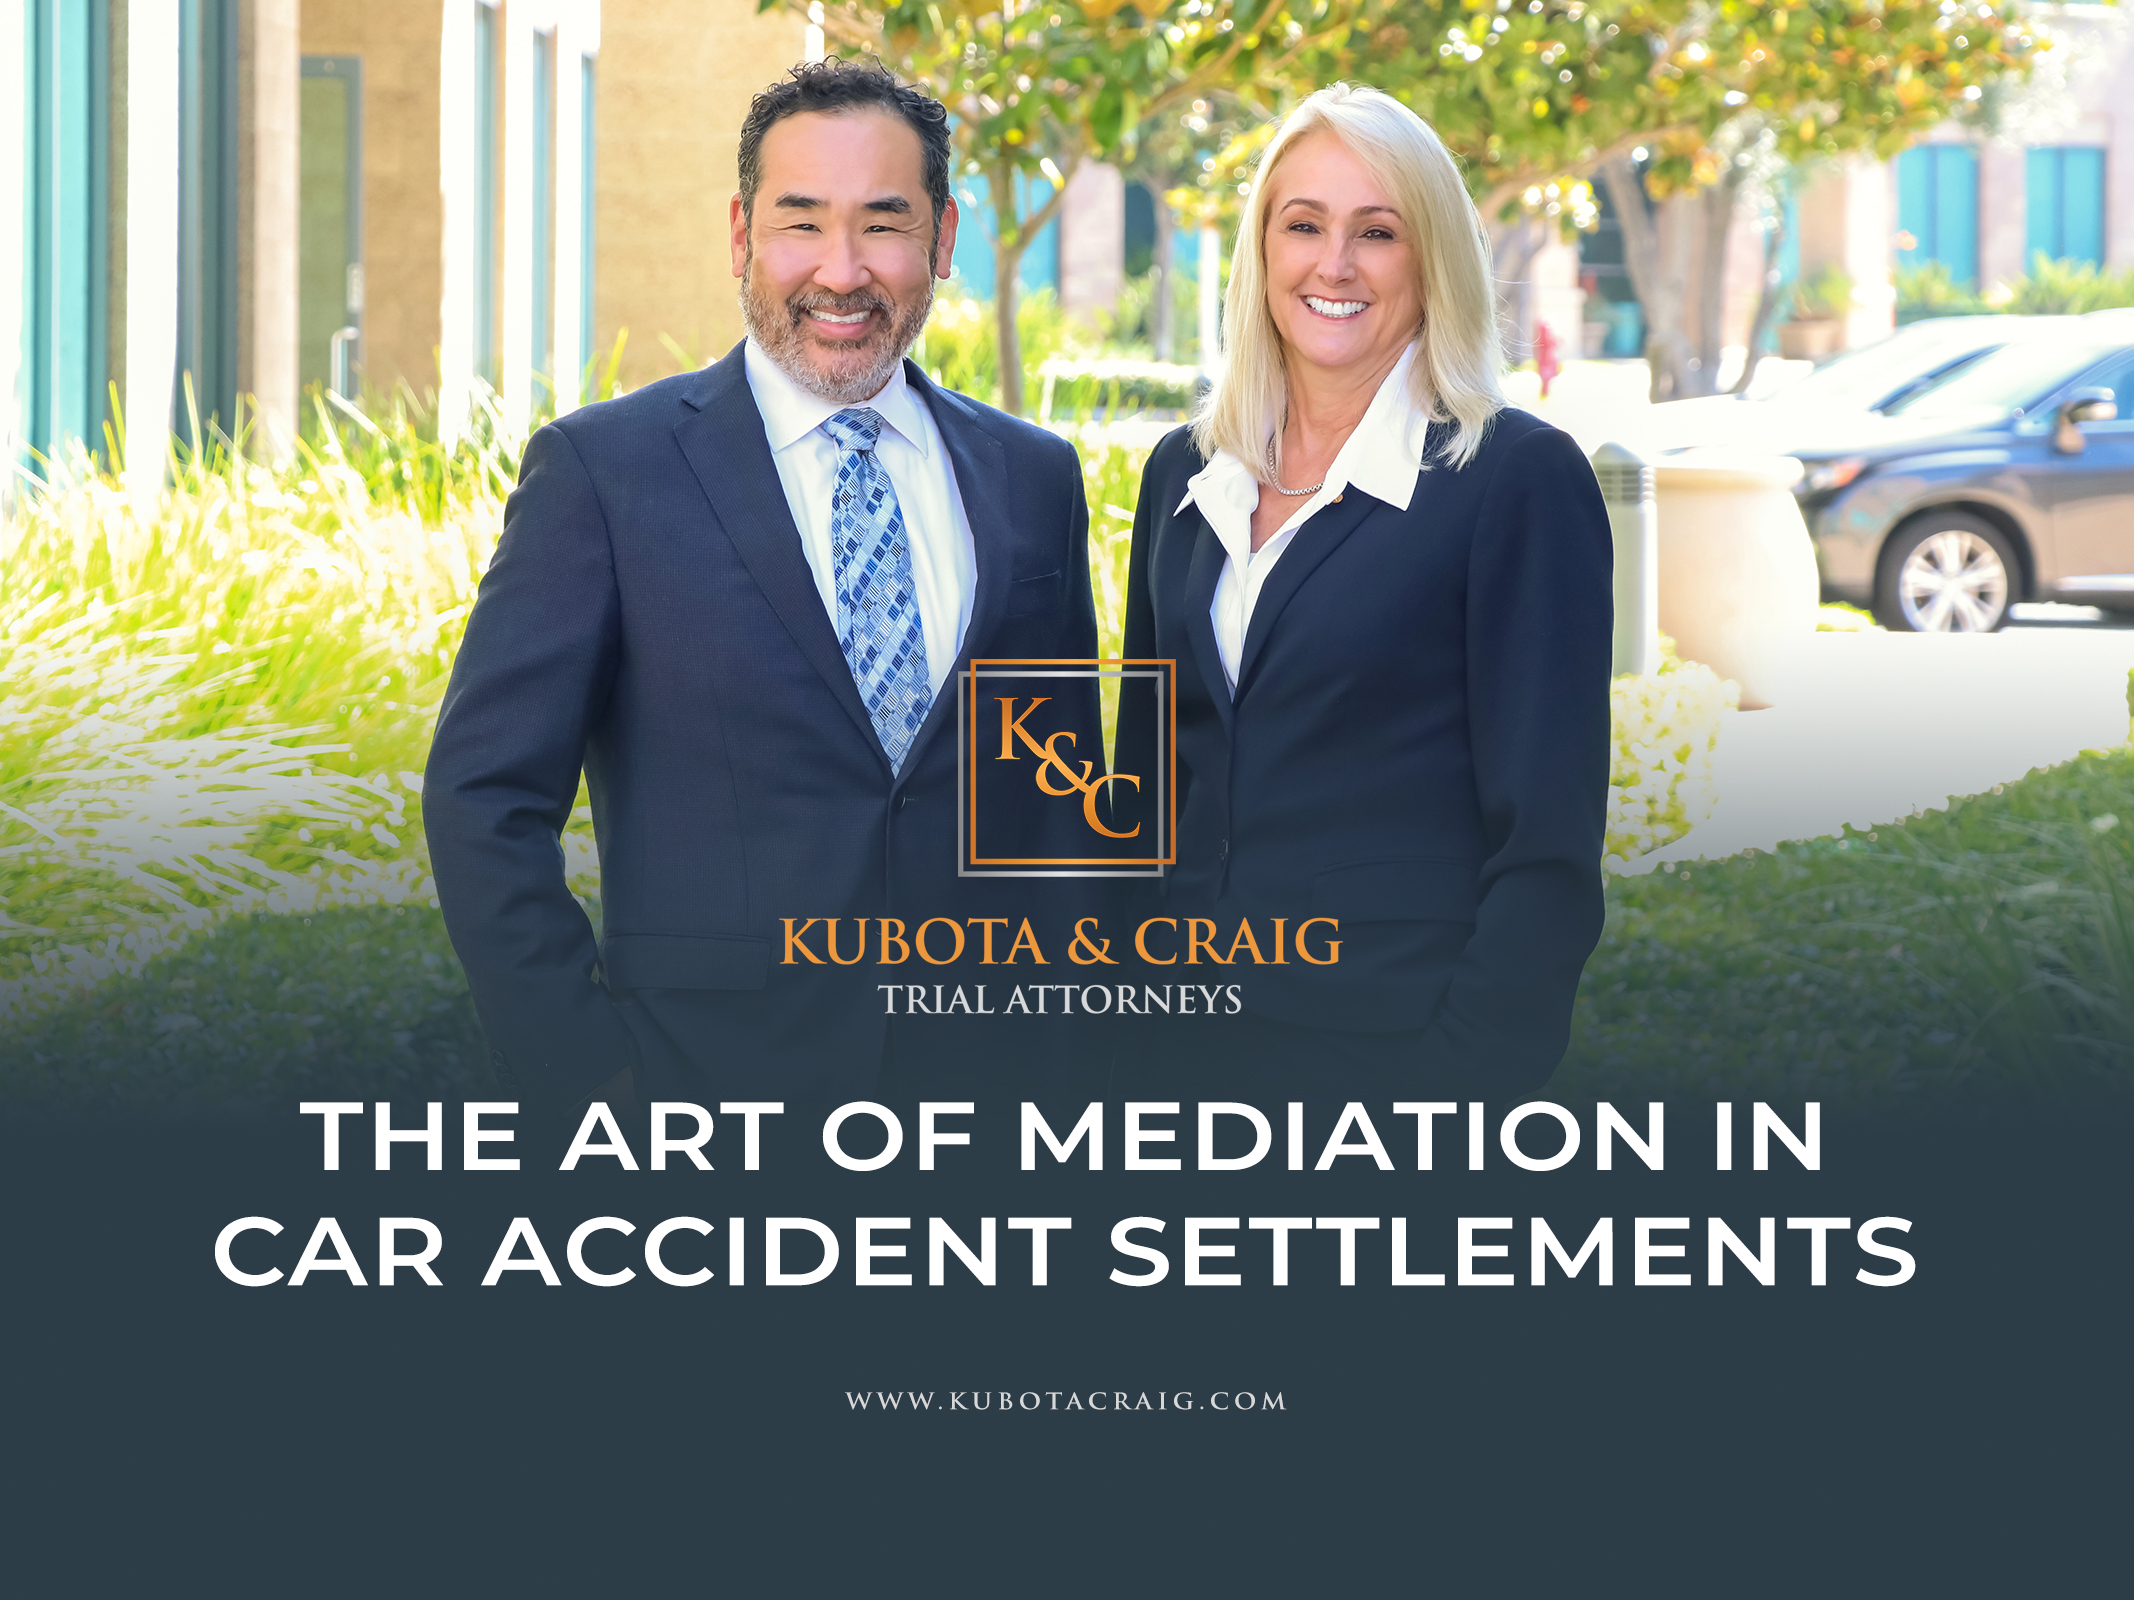 The art of mediation in car accident settlements